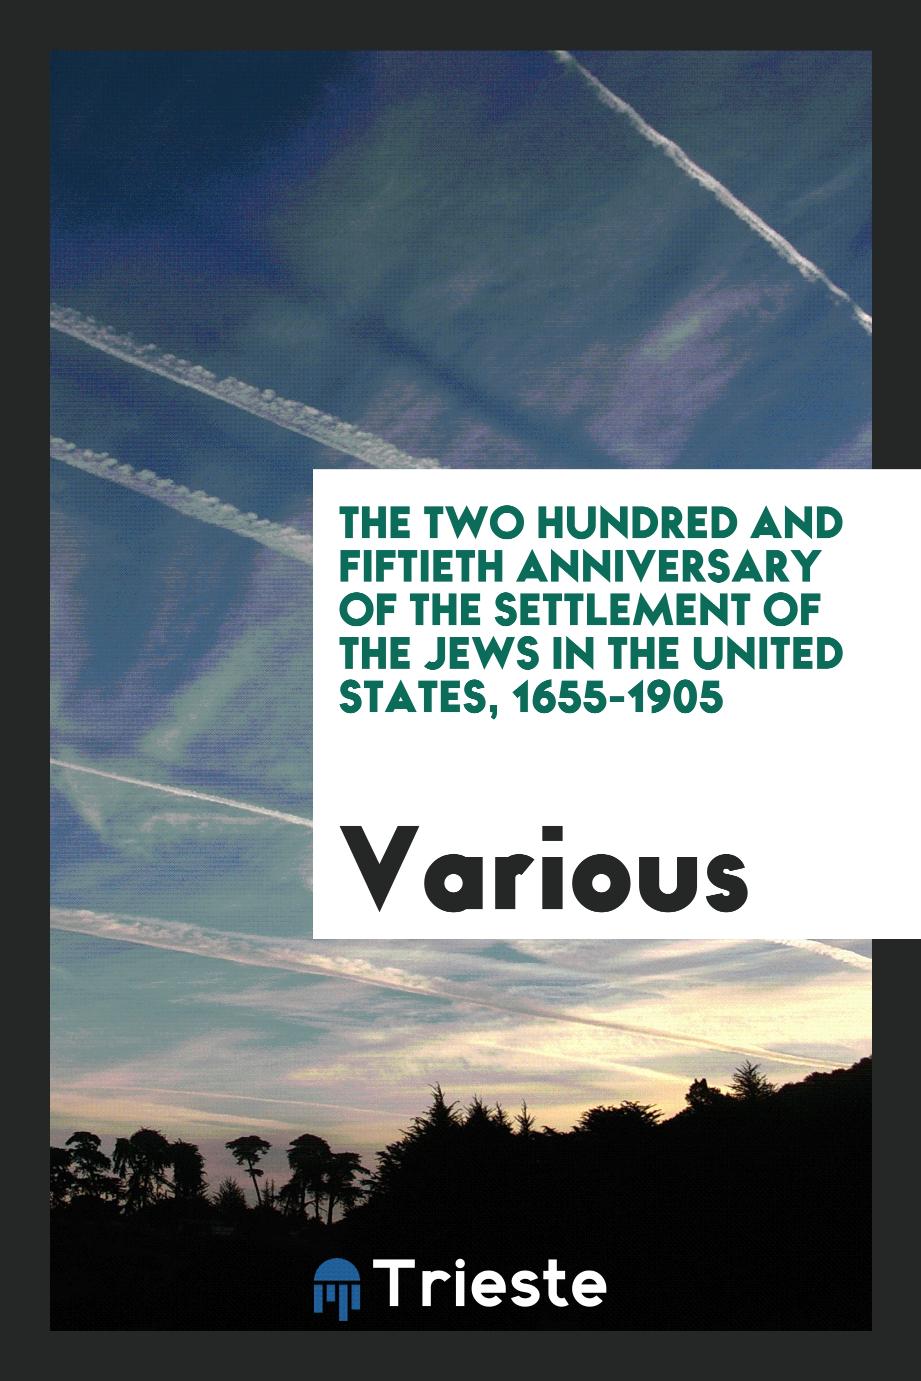 The two hundred and fiftieth anniversary of the settlement of the Jews in the United States, 1655-1905